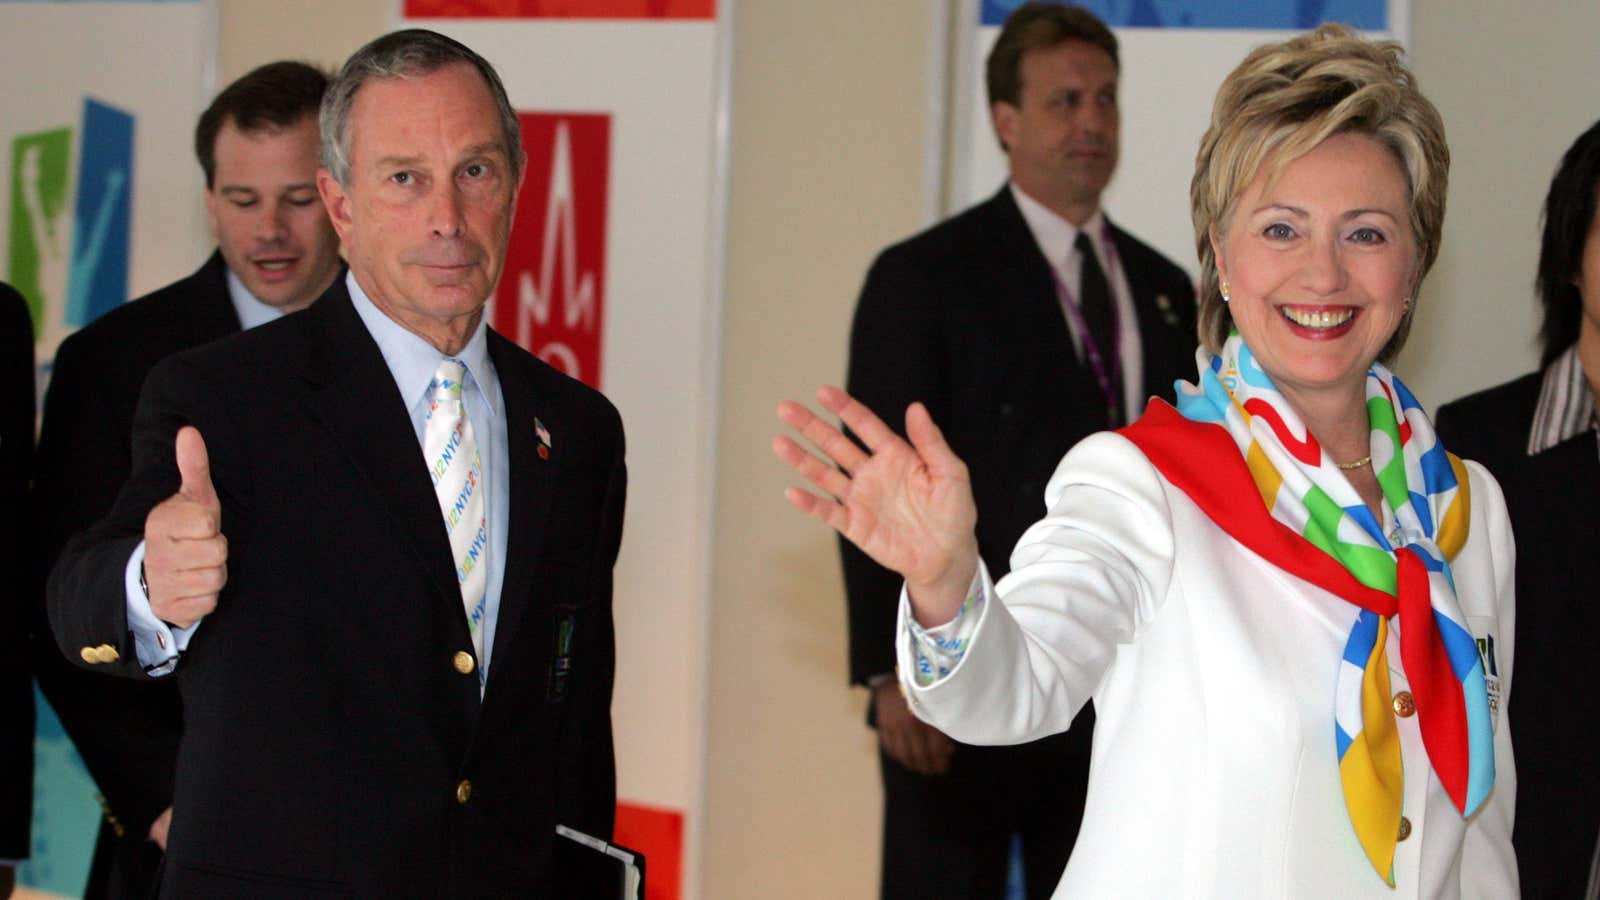 Then-senator Clinton and then-mayor Bloomberg, in 2005.